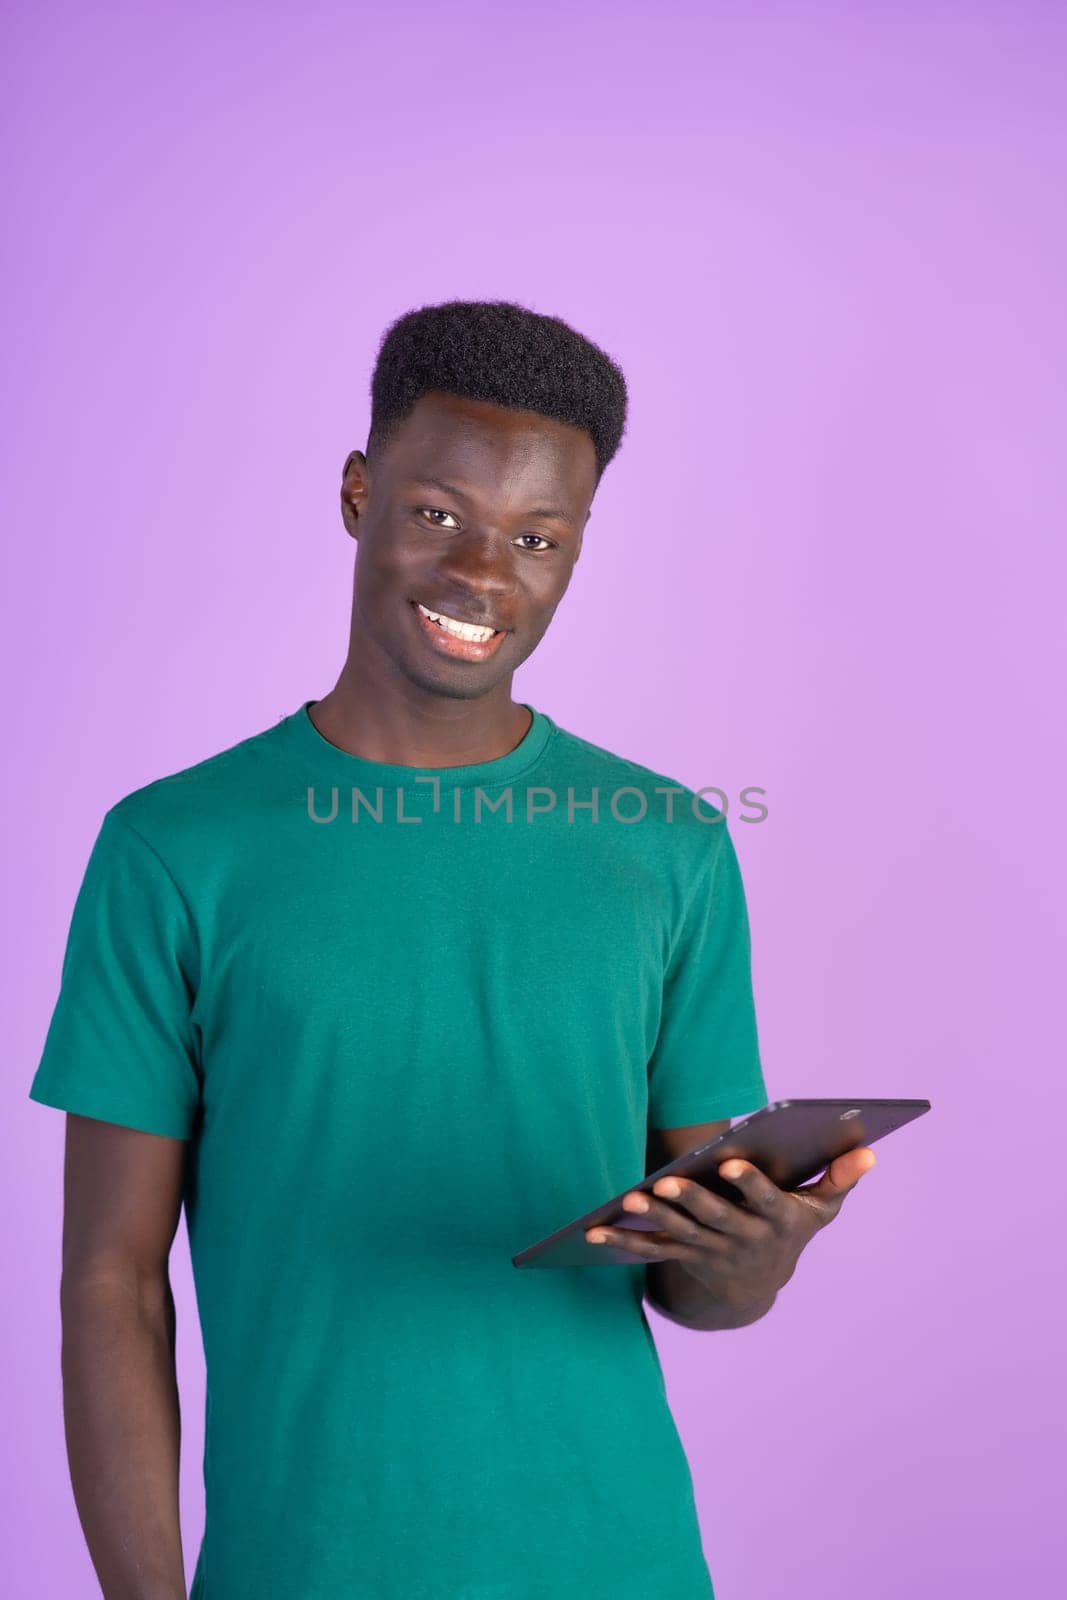 A man wearing a green shirt is holding a tablet device in his hands.